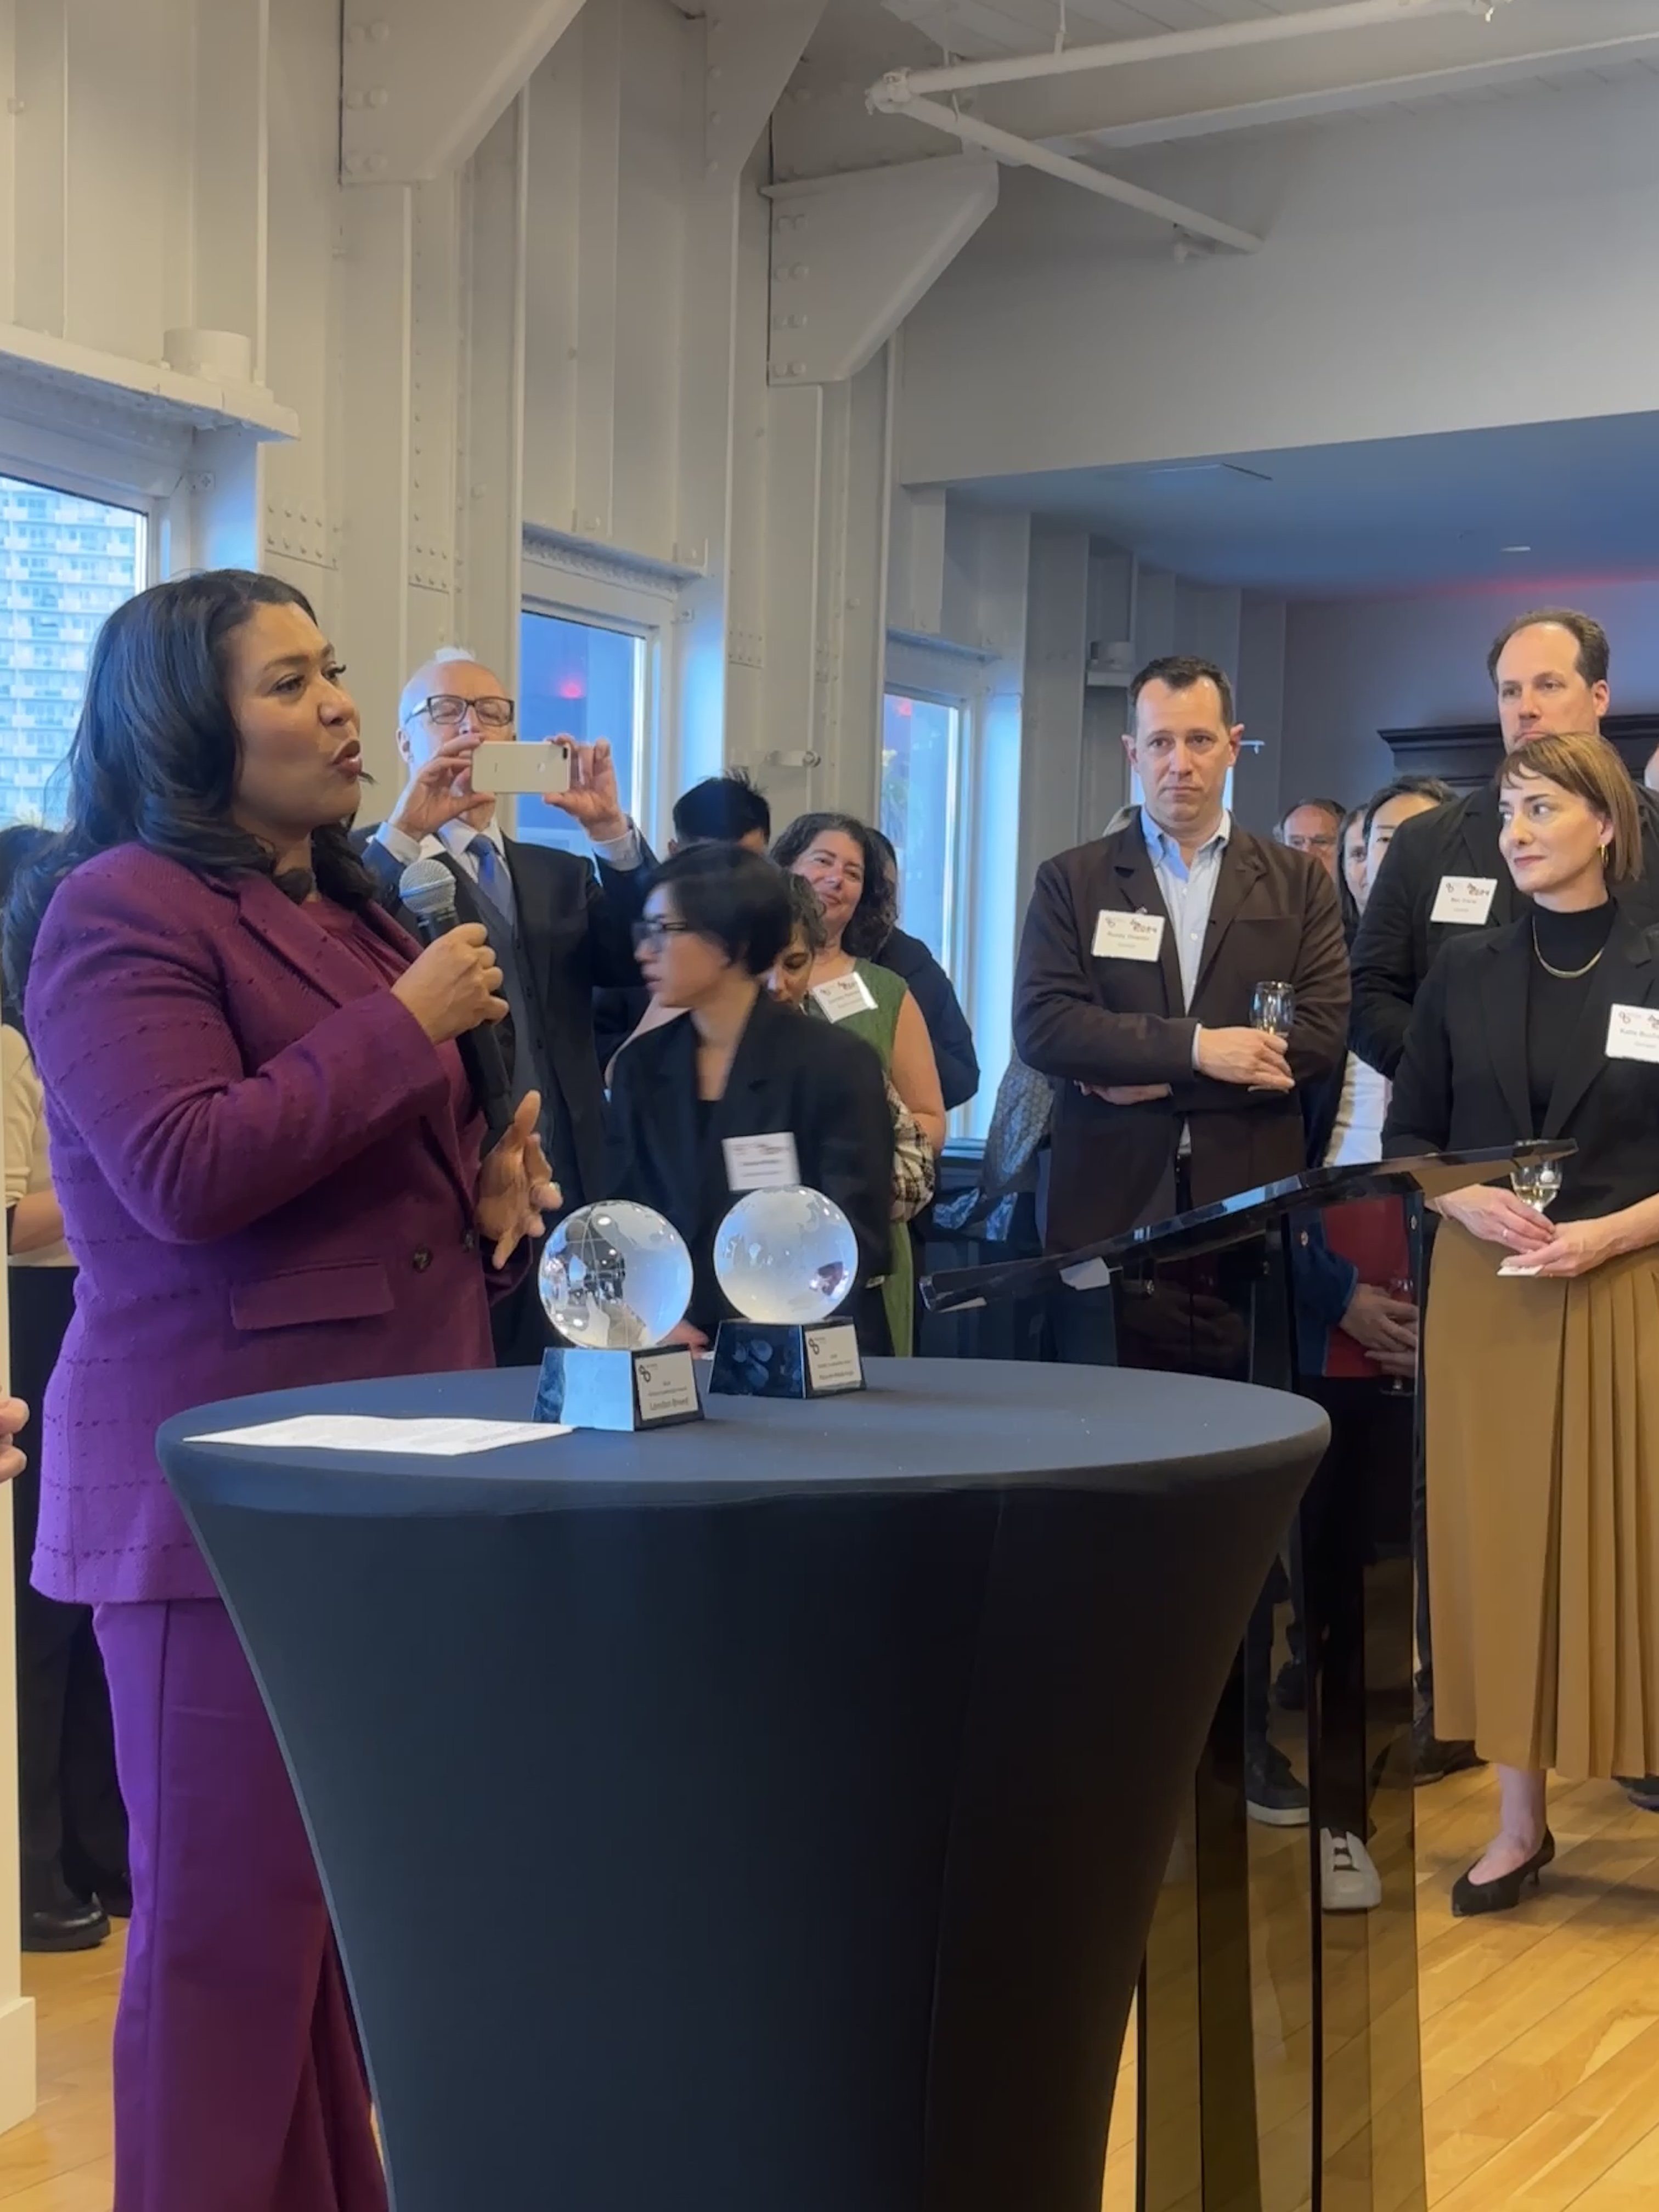 SF Mayor London Breed holds a microphone and speaks to people in a conference room. She is presenting awards.